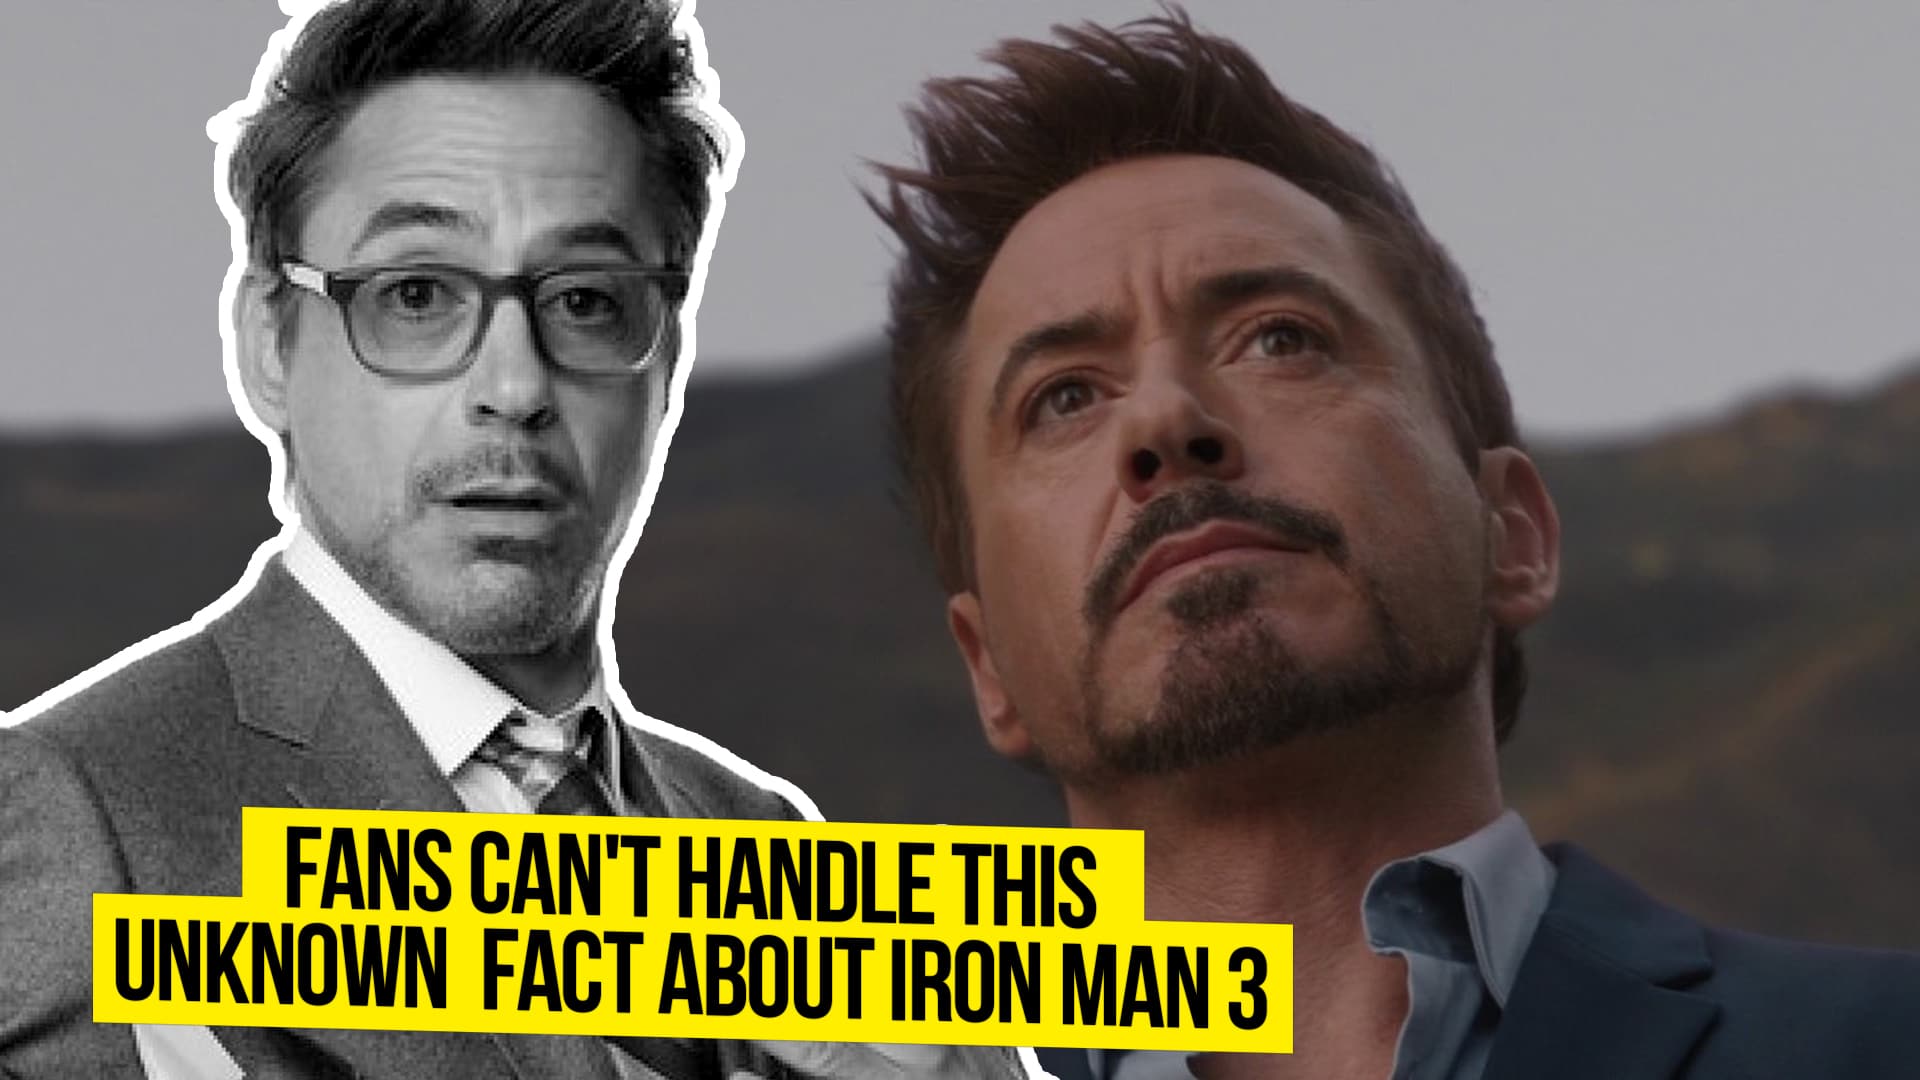 Fans Can’t Handle This Unknown Fact About Iron Man 3